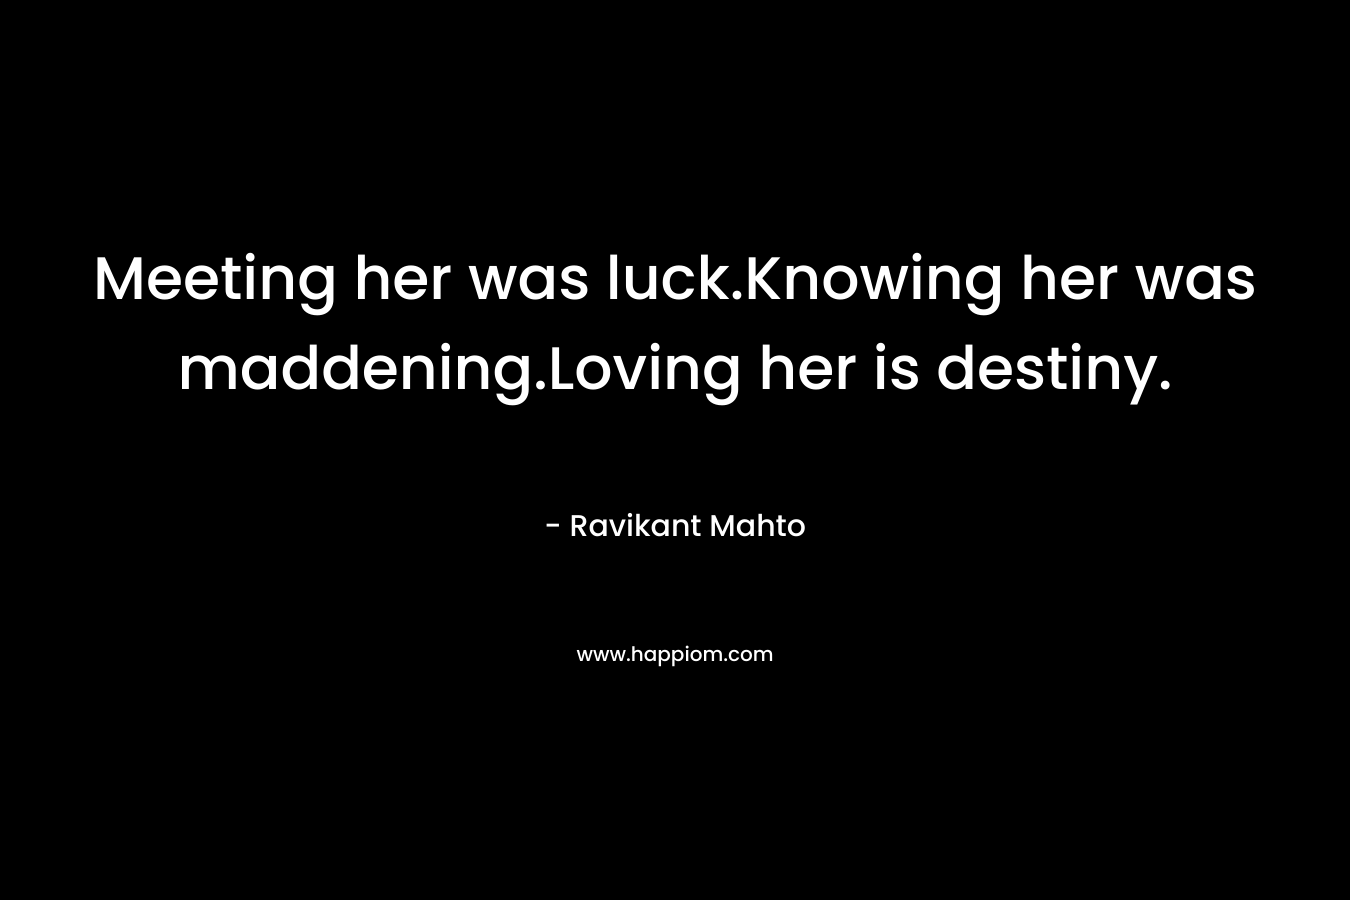 Meeting her was luck.Knowing her was maddening.Loving her is destiny. – Ravikant Mahto